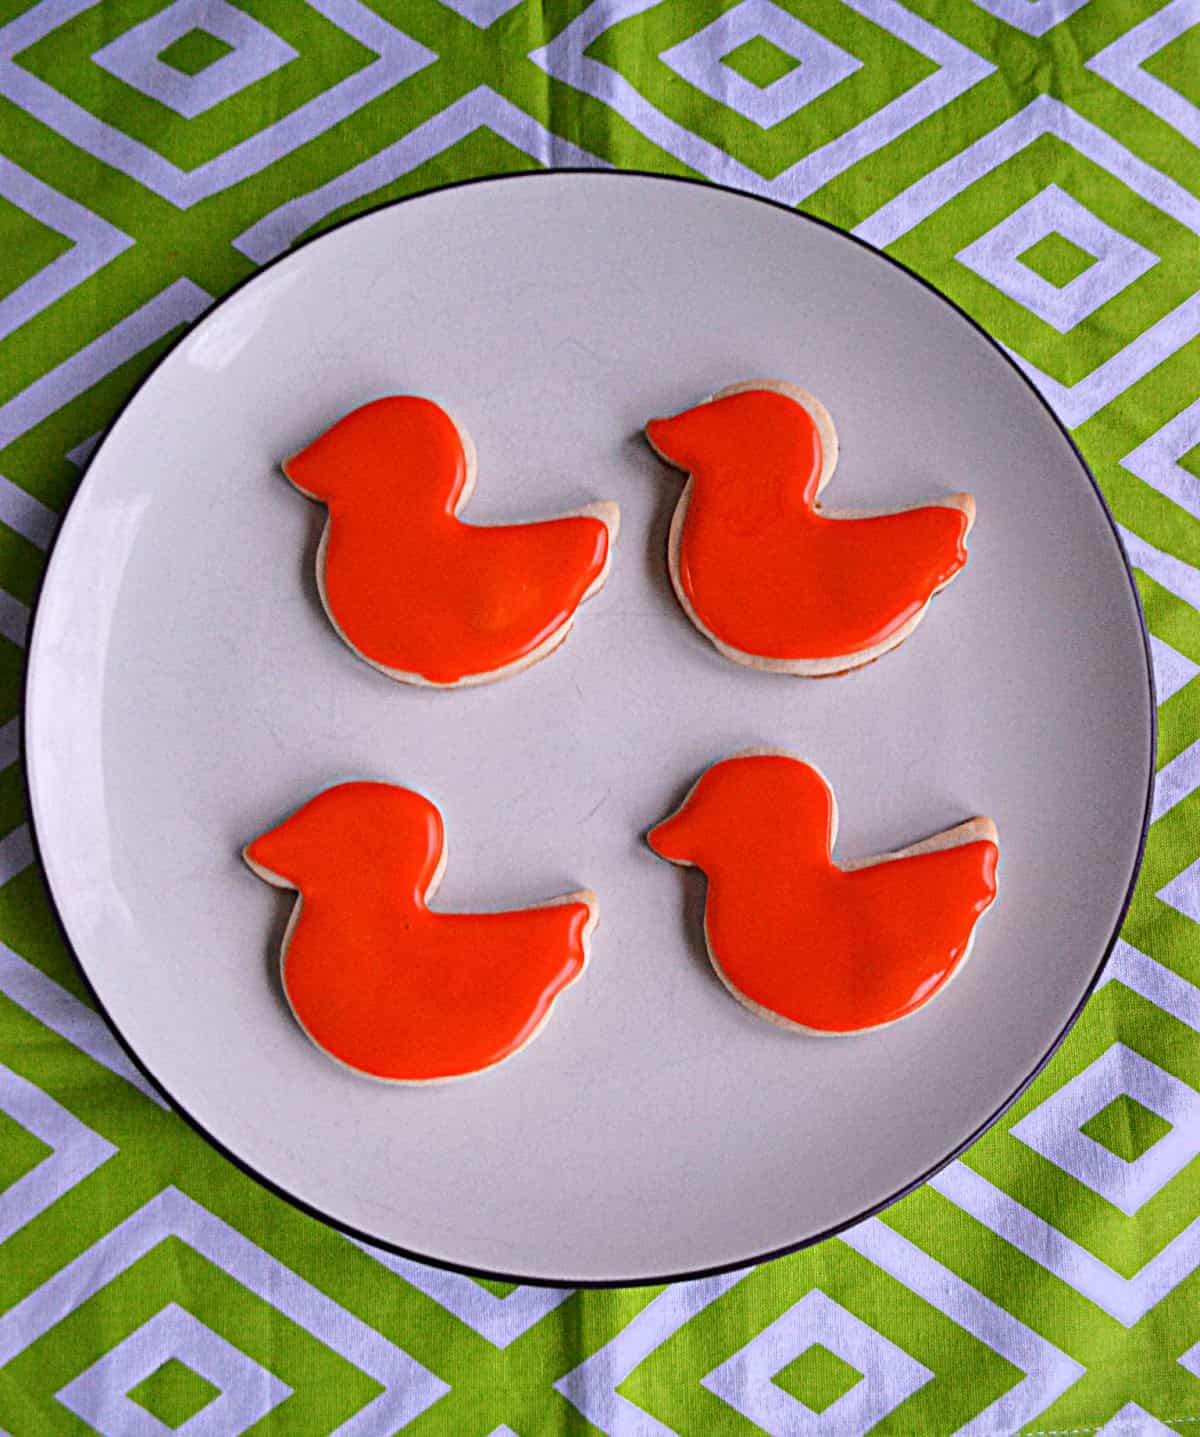 A plate of bird cookies with orange icing on them.